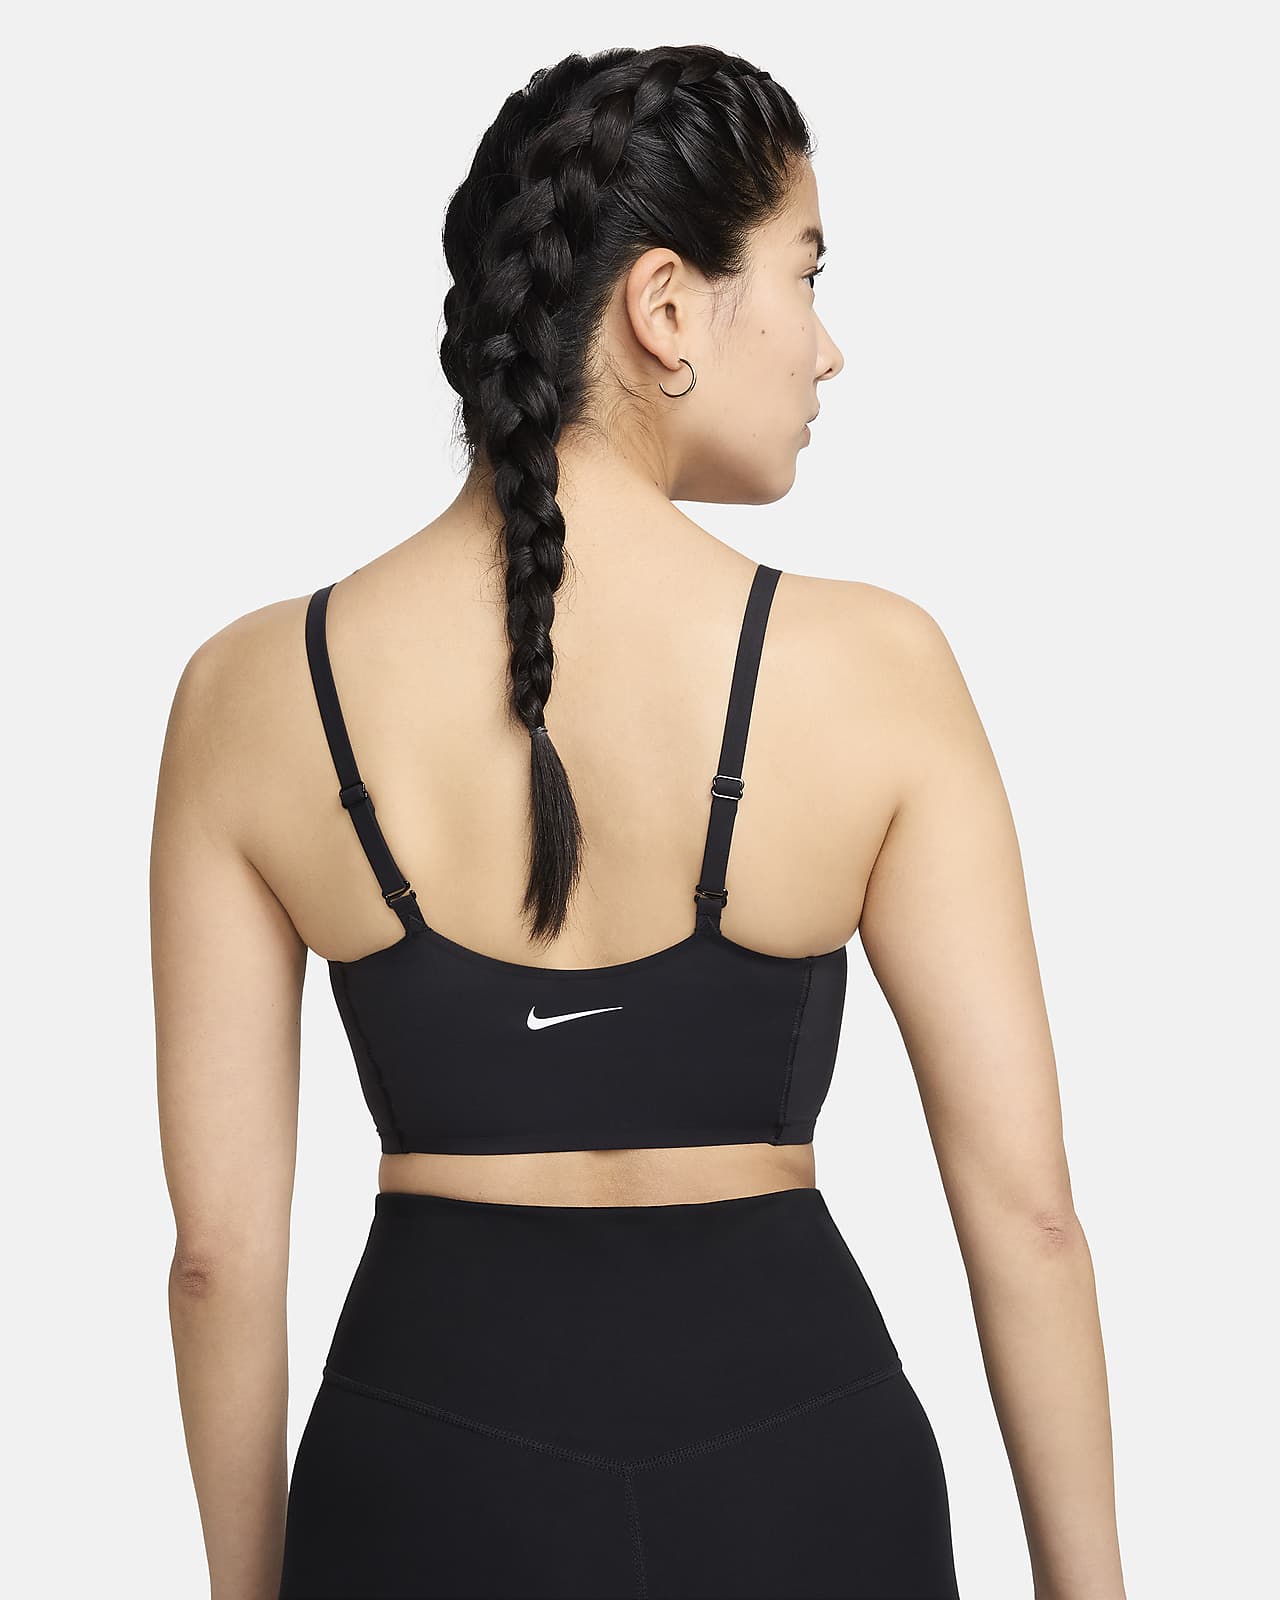 Grado Celsius canal hospital Nike Indy Luxe Women's Light-Support Padded Convertible Sports Bra. Nike MY